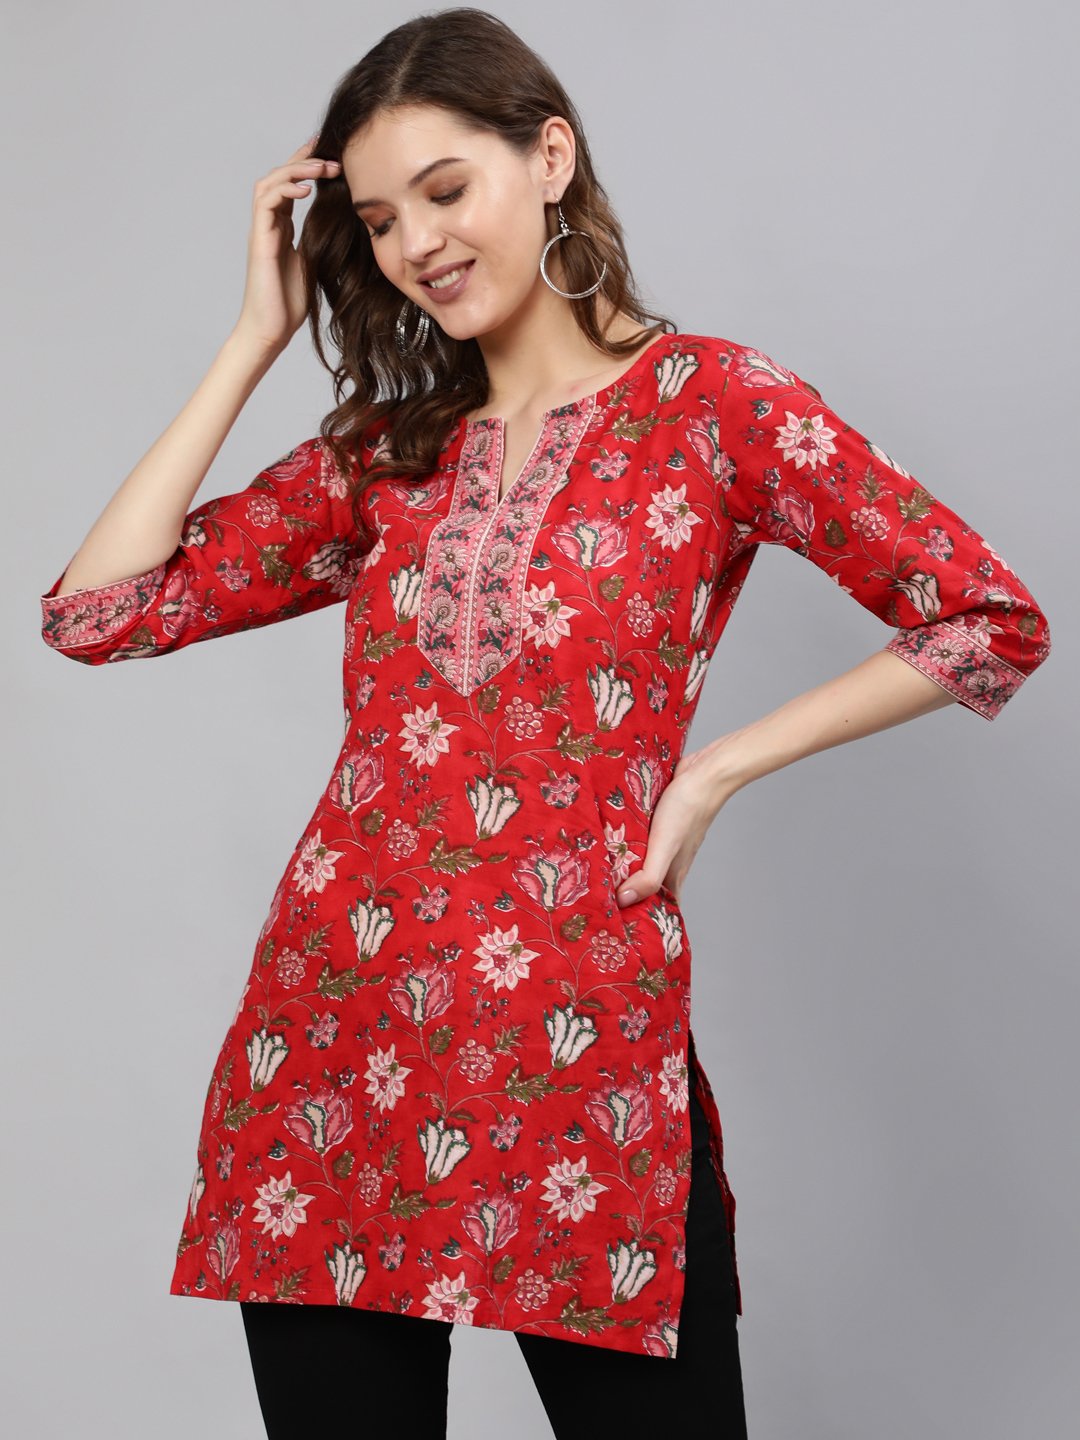 Women's Red Floral Printed Tunic With Three Quarter Sleeves - Nayo Clothing USA